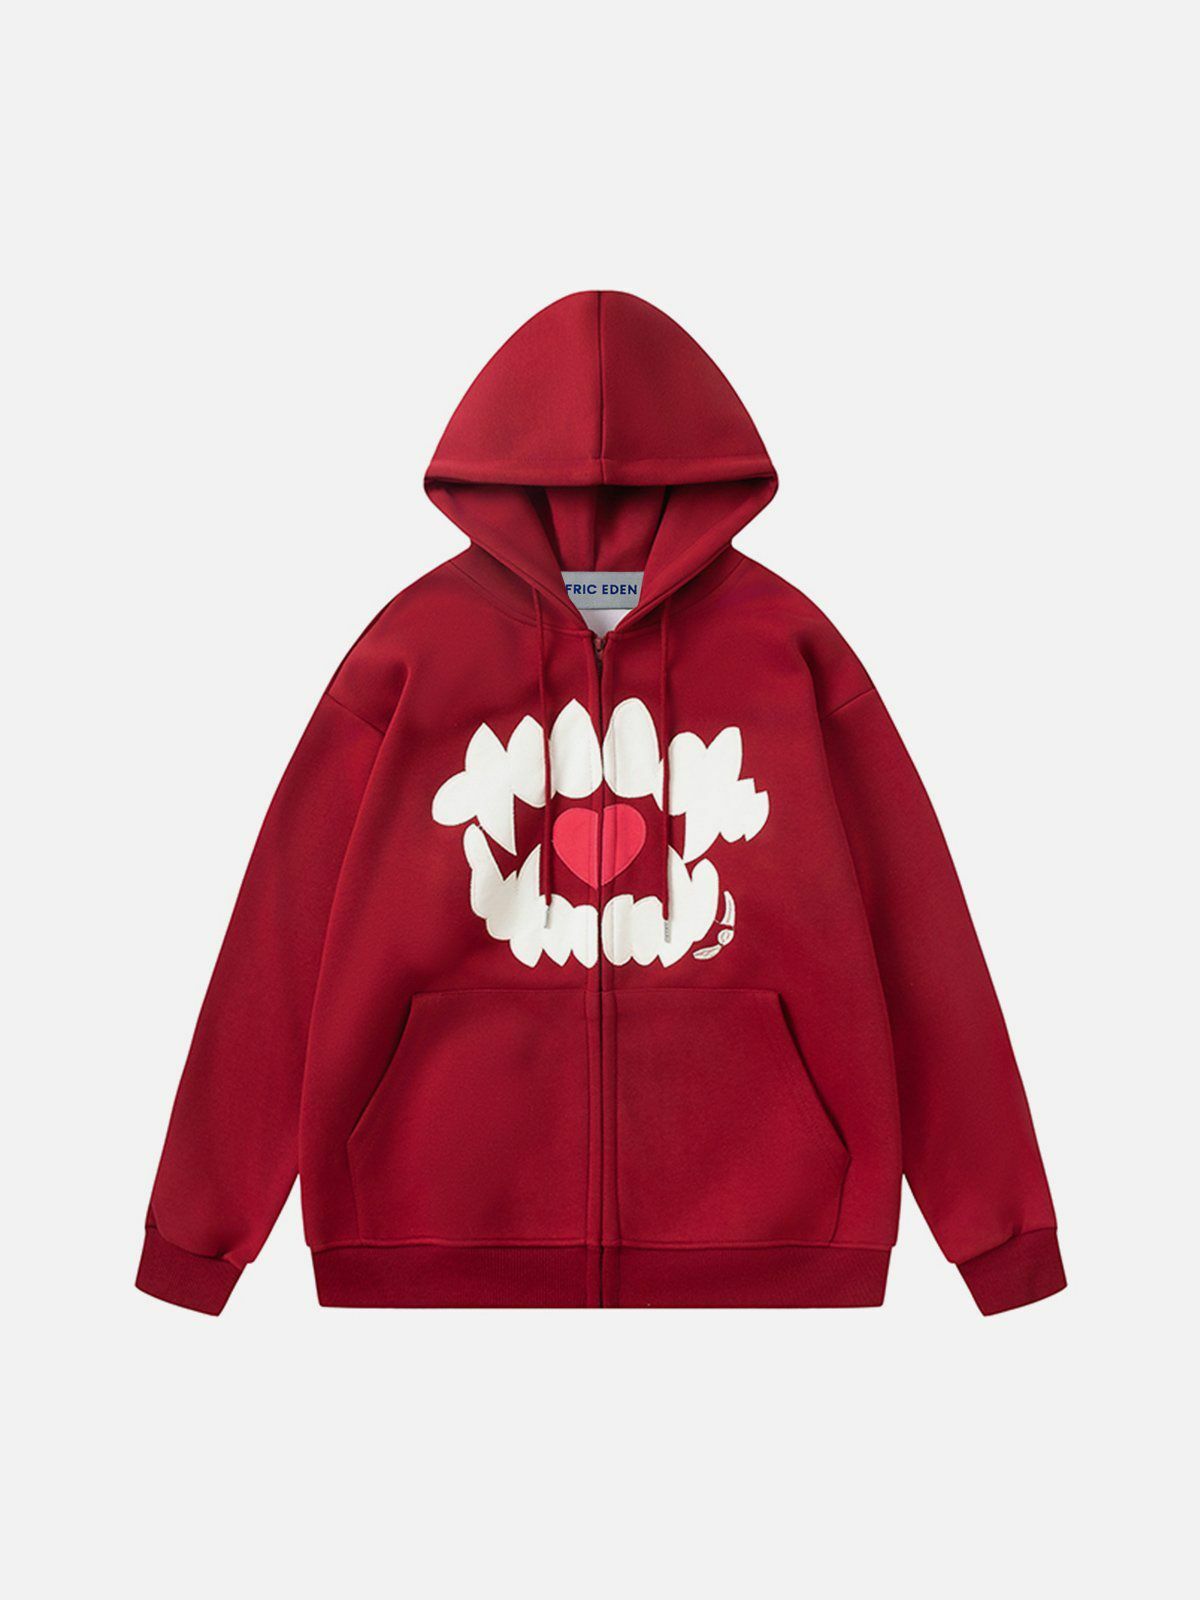 embroidered heart hoodie quirky & vibrant streetwear 8611